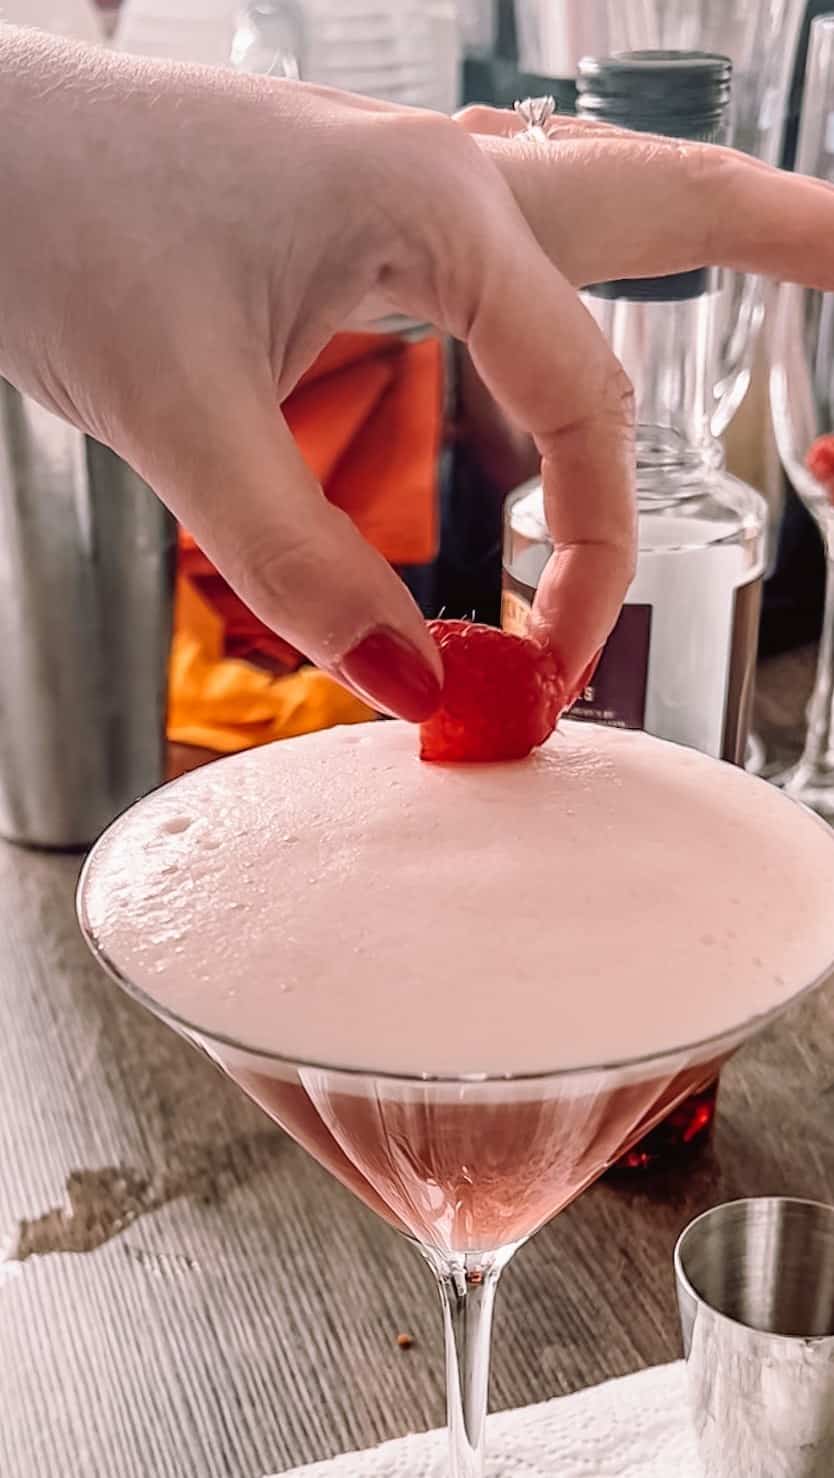 Mrs Perren is a woman of many talents but making French Martinis is my favourite 🍸🇫🇷 @stephperren 

Here’s your recipe for when the weekend finally reaches us, it’s really taking its time this week isn’t it!

🎥 also featuring @lucyje1 and @amanda.lumsden 

#frenchmartini #martini #cocktail #cocktailmaking #cocktails #cocktailsofinstagram #cocktailrecipes #cocktailrecipe #frenchmartinis #vodkacocktail #vodkadrinks #vodkacocktails #vodka #chambord